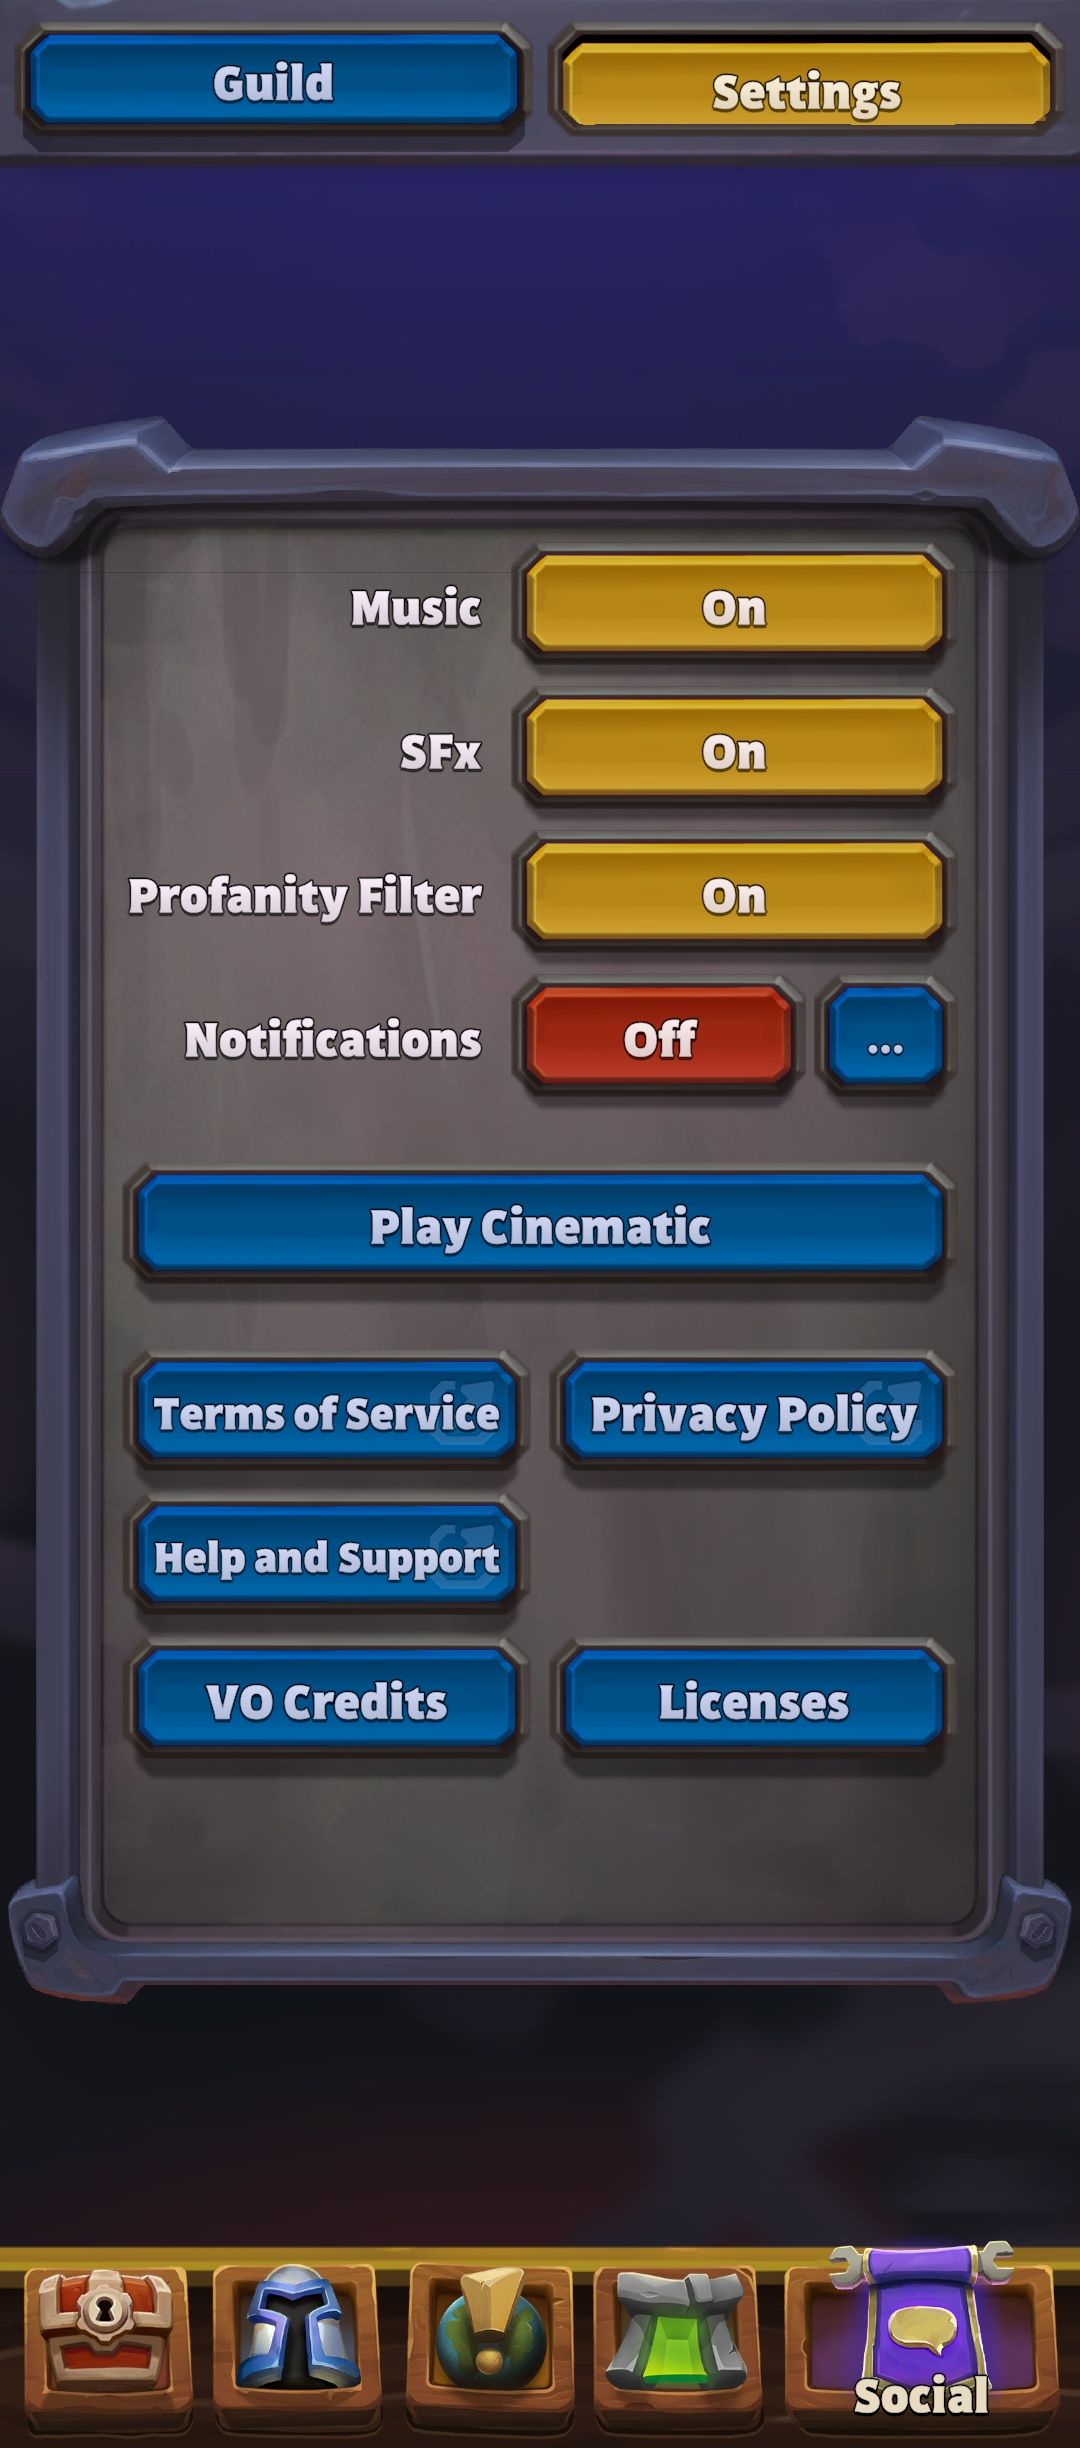 Warcraft Arclight Rumble beta hands on settings